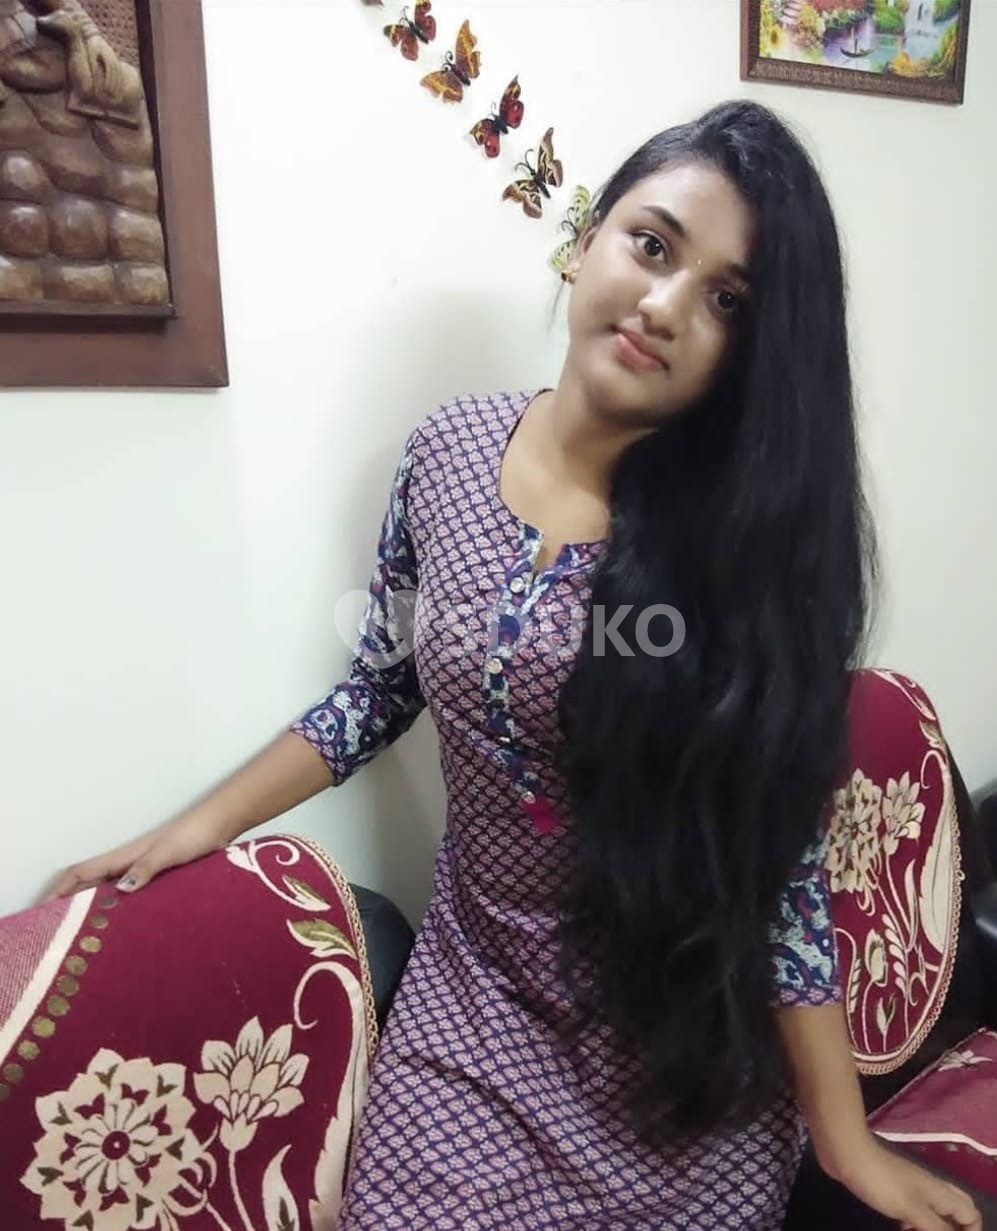 SECUNDERABAD 💯% FULLY SATISFACTION AND DOORSTEP INCALL .OUTCALL SERVICE AVAILABLE SAFE AND SECURE